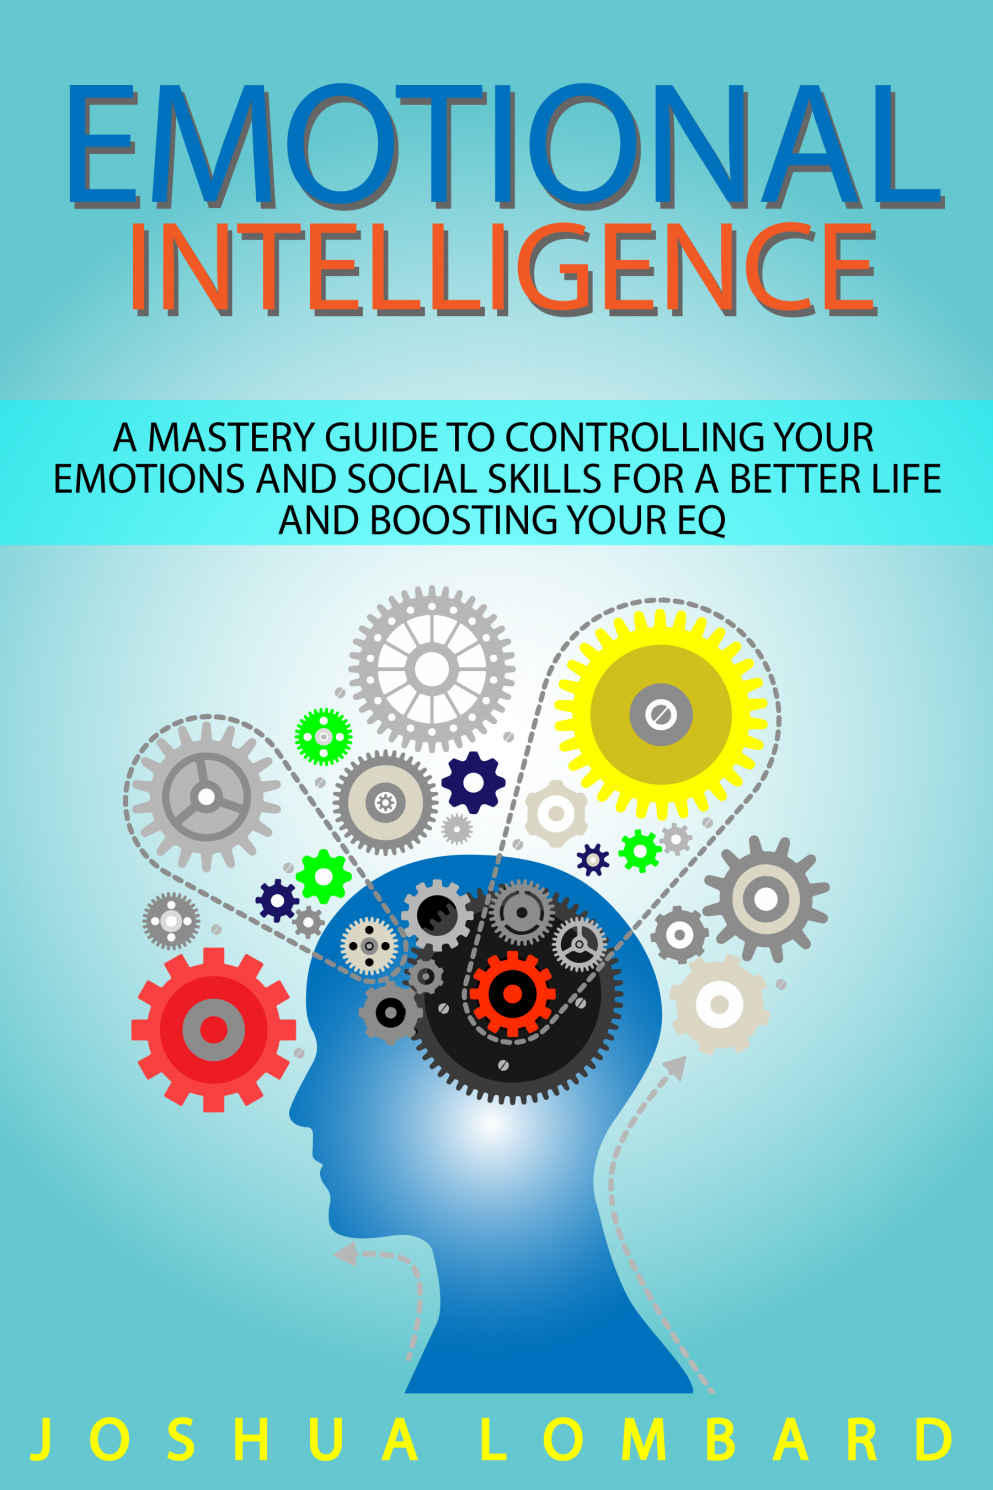 researches on emotional intelligence